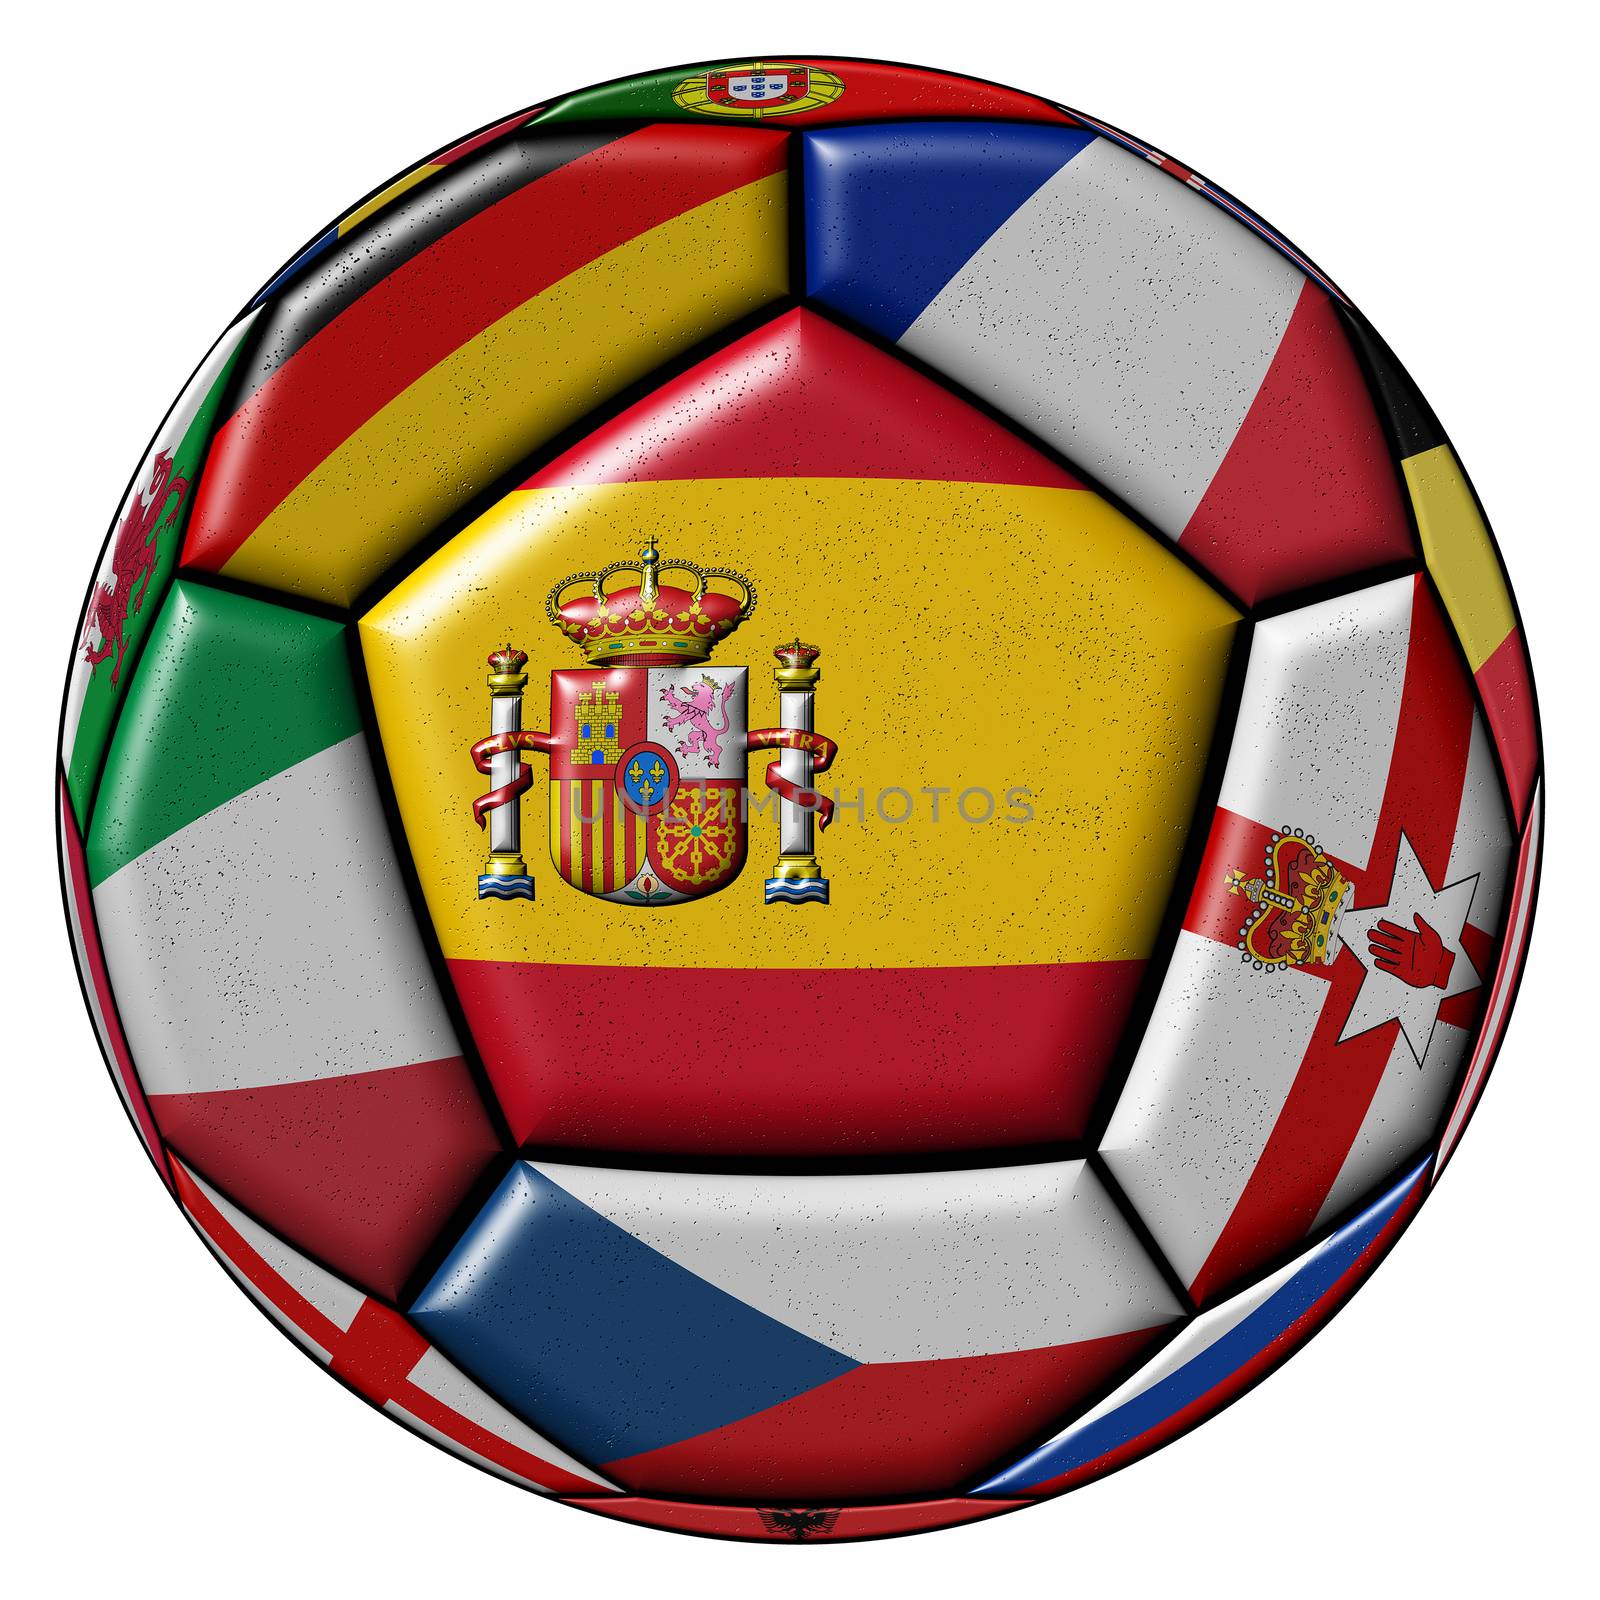 Soccer ball with flags - flag of Spain in the center by Mibuch